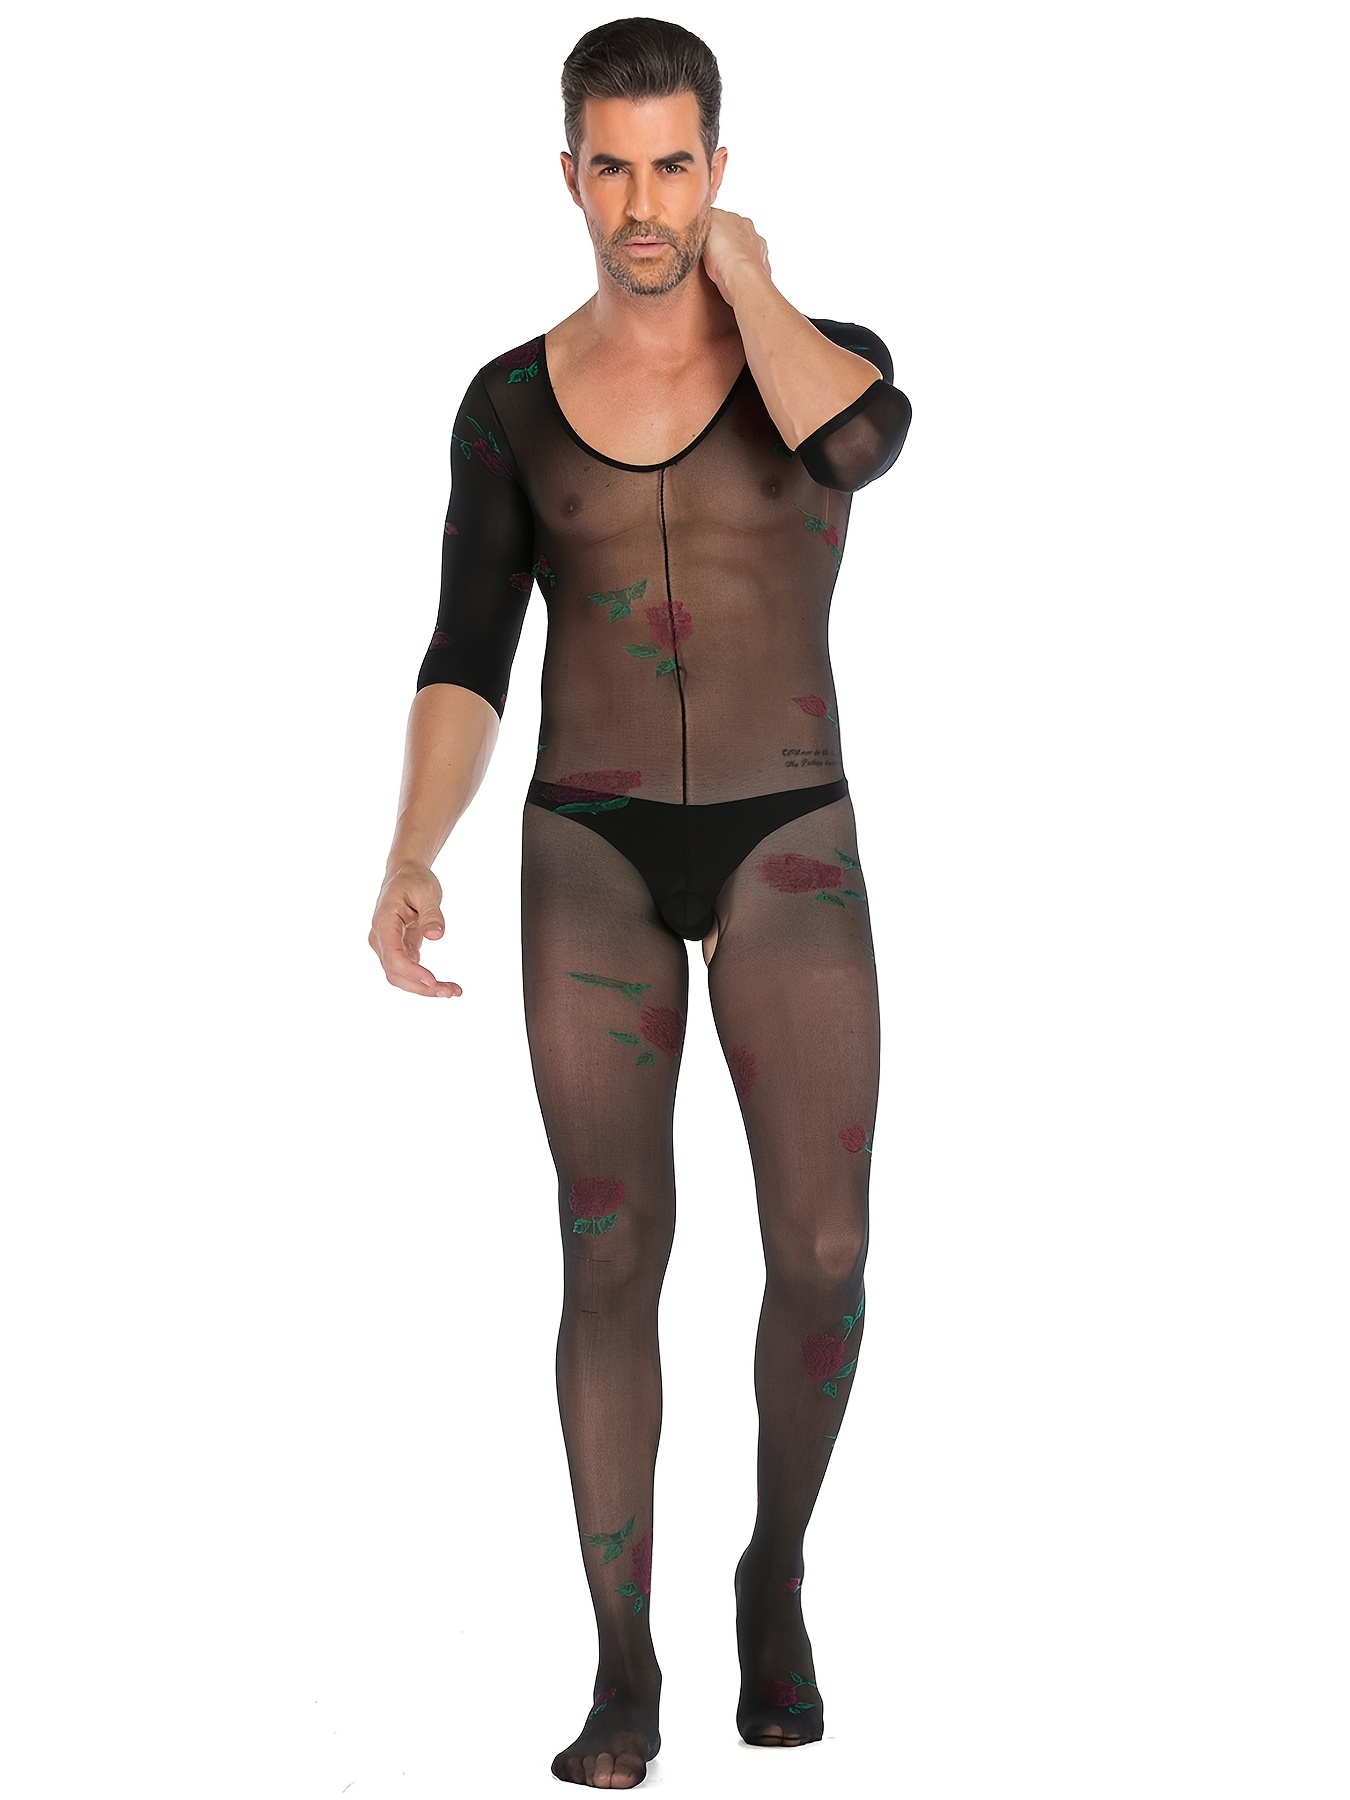 Bodystocking for Ladies Crotchless See-Through Temptation Shapewear Body  Tights